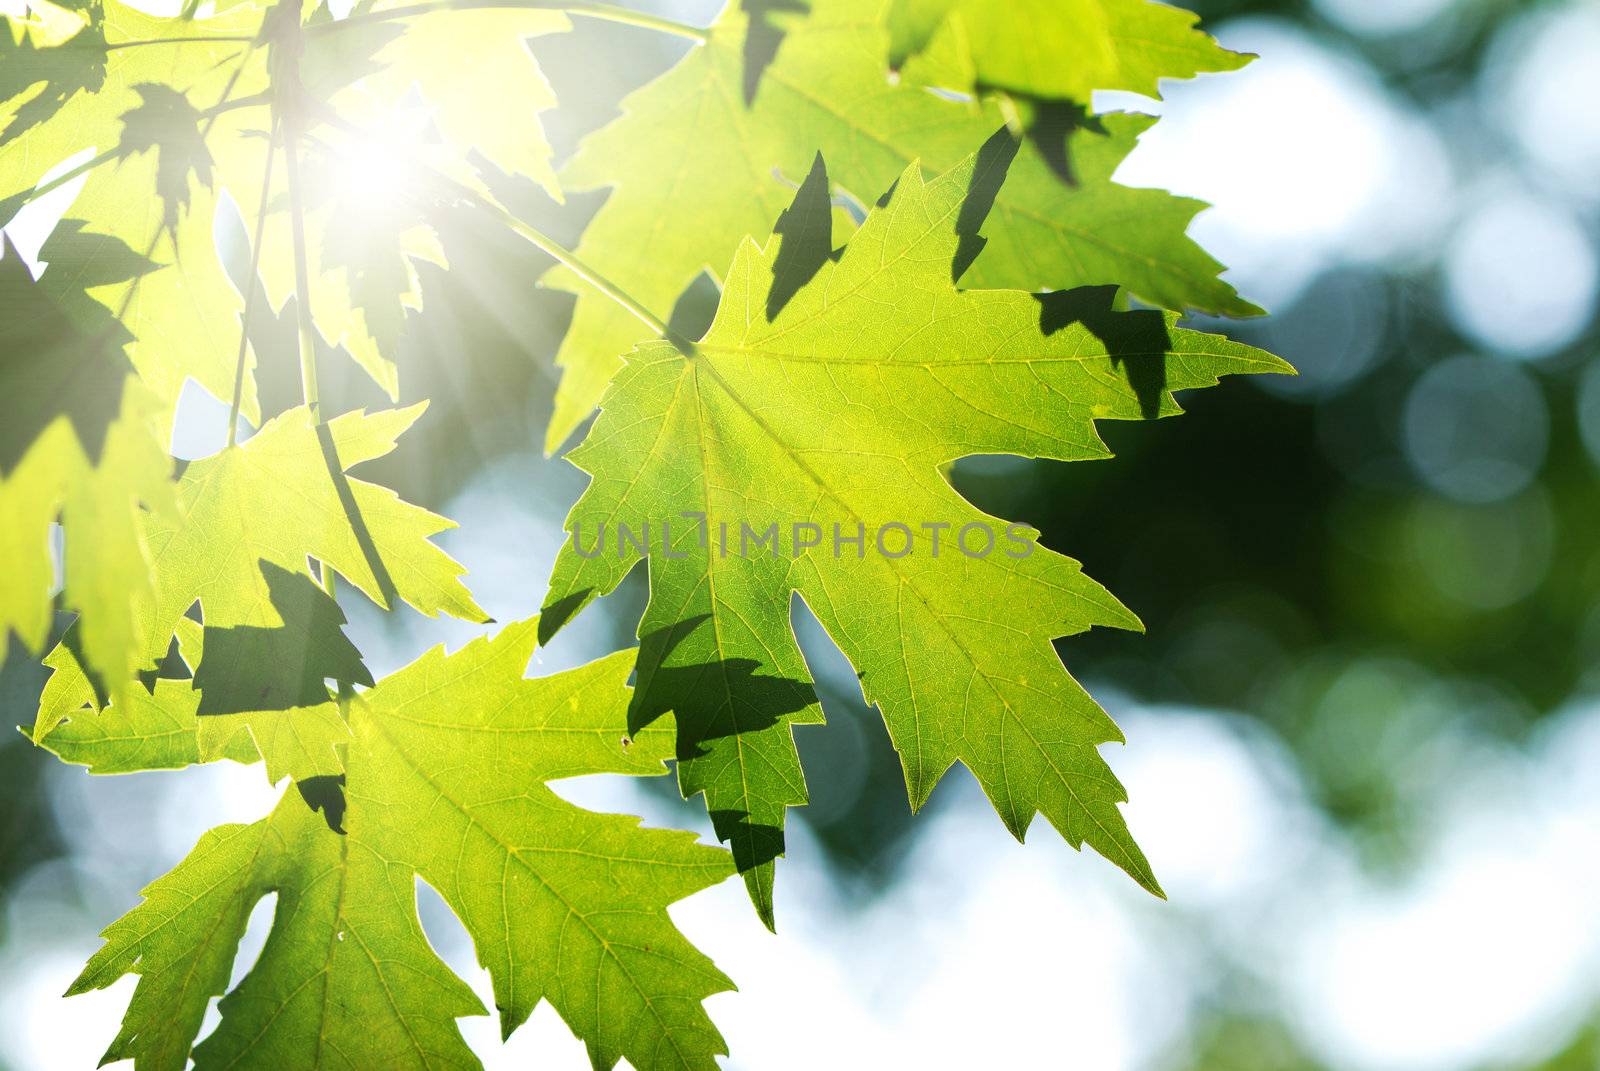 Green leaves background in sunlight